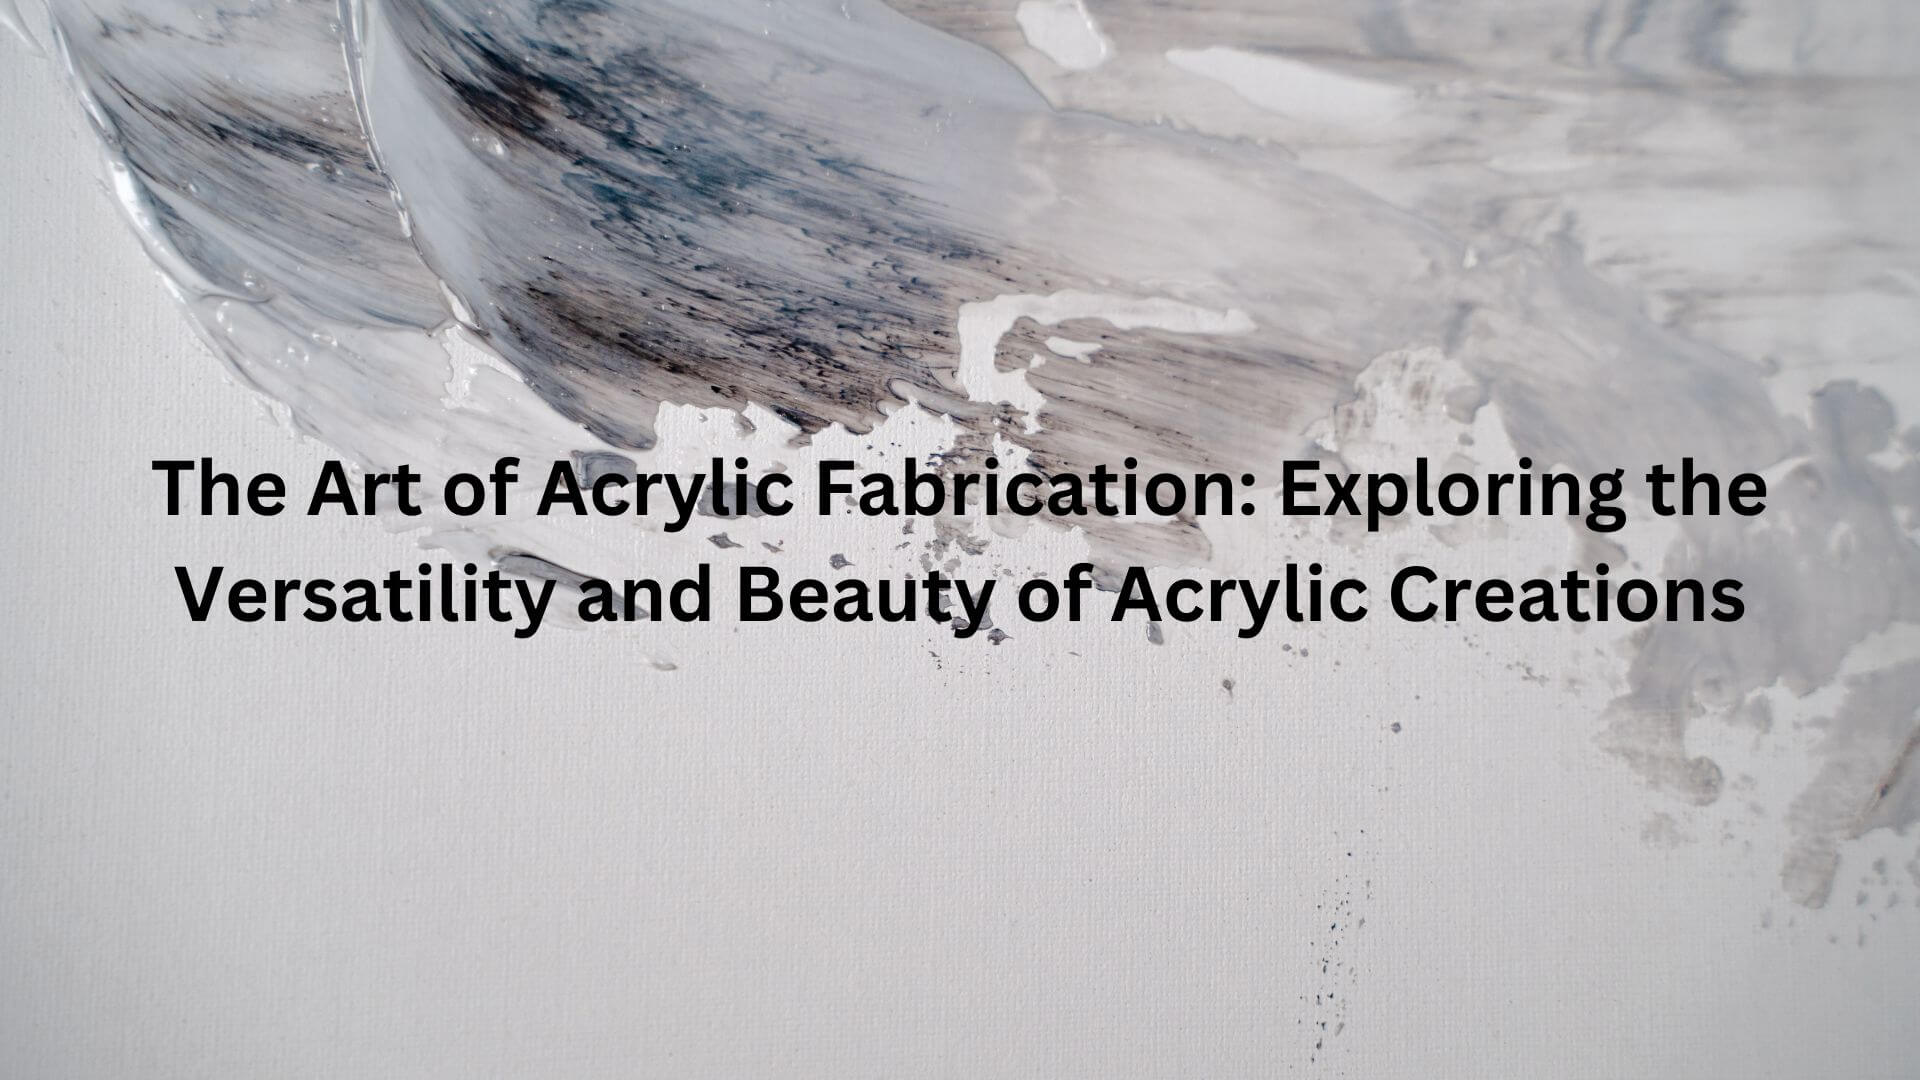 The Art of Acrylic Fabrication: Exploring the Versatility and Beauty of Acrylic Creations